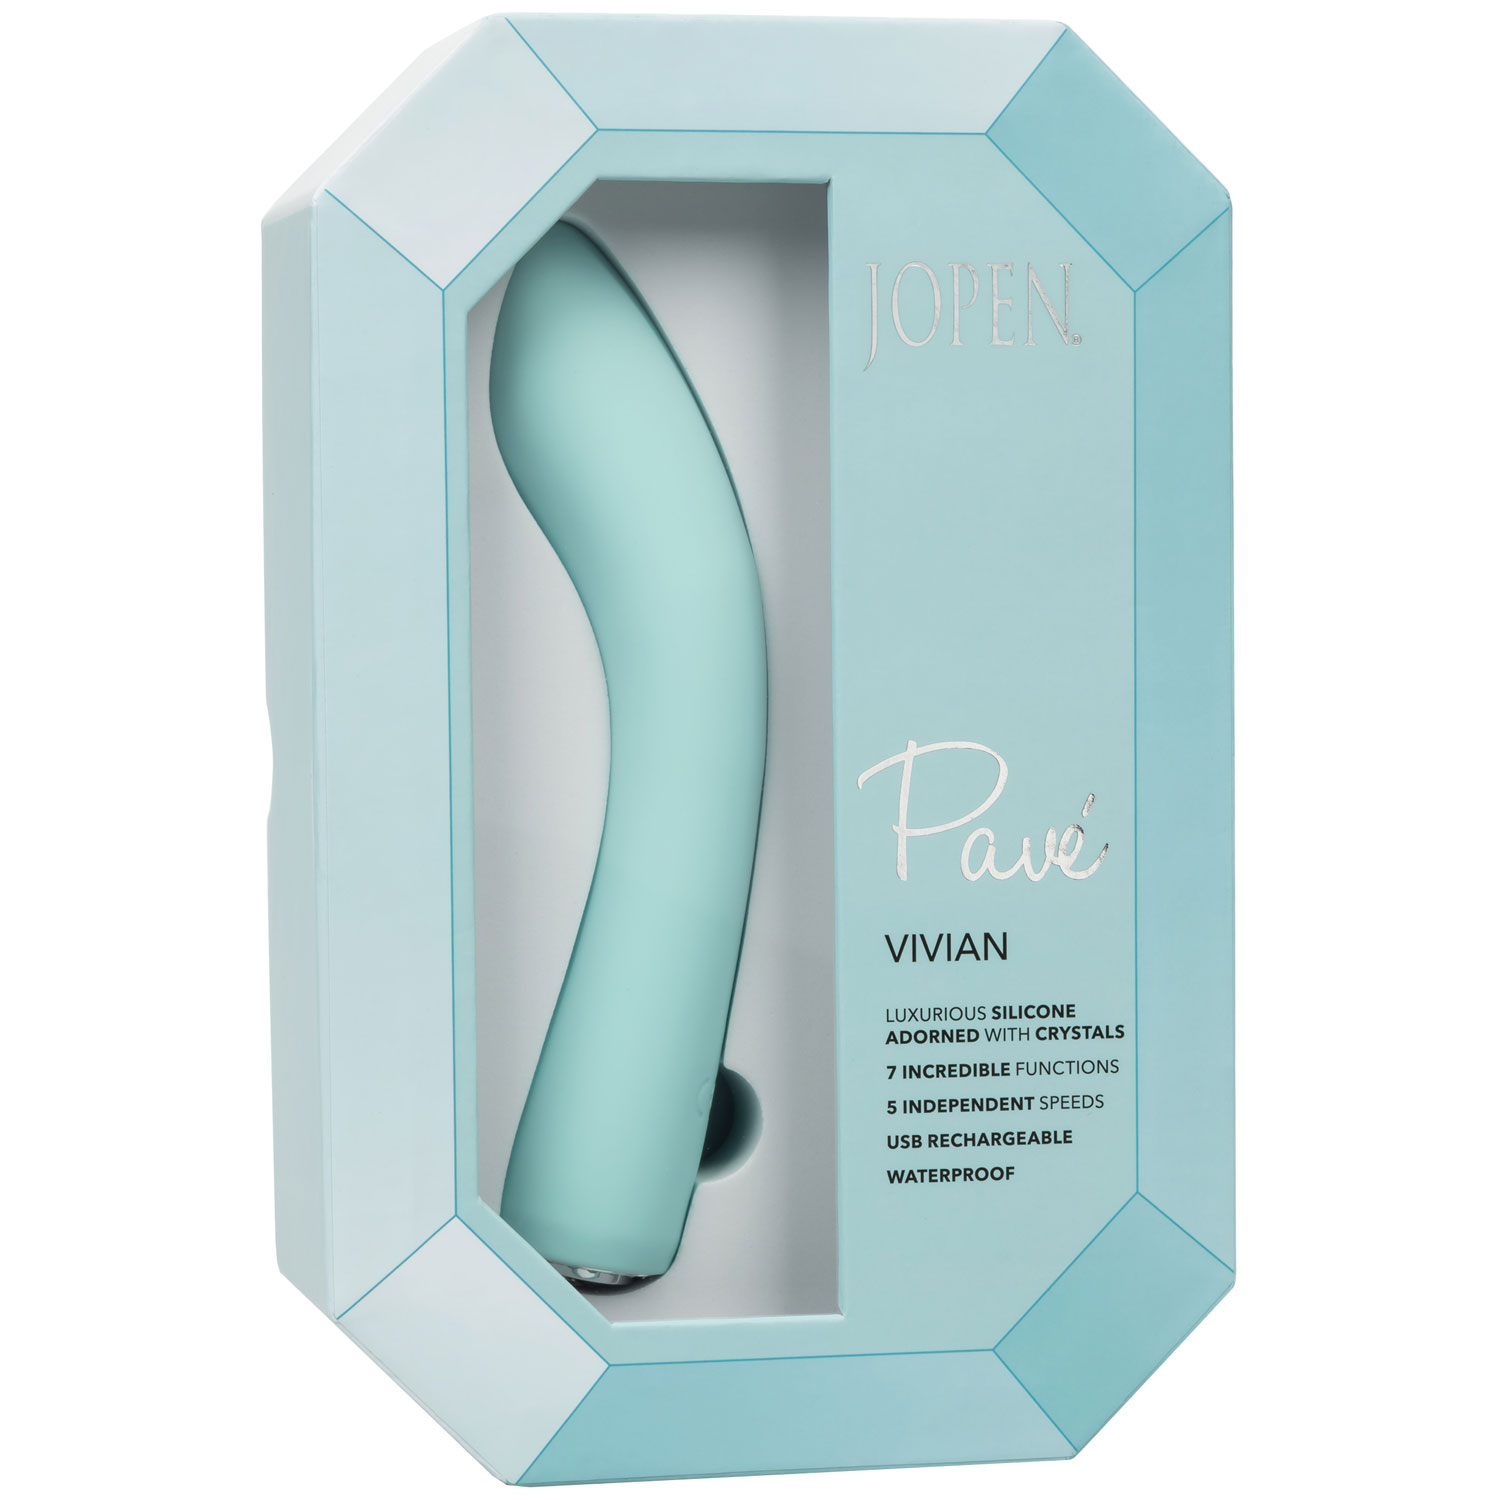 Pave Vivian Rechargeable Waterproof Silicone G-Spot Wand Vibrator - Package